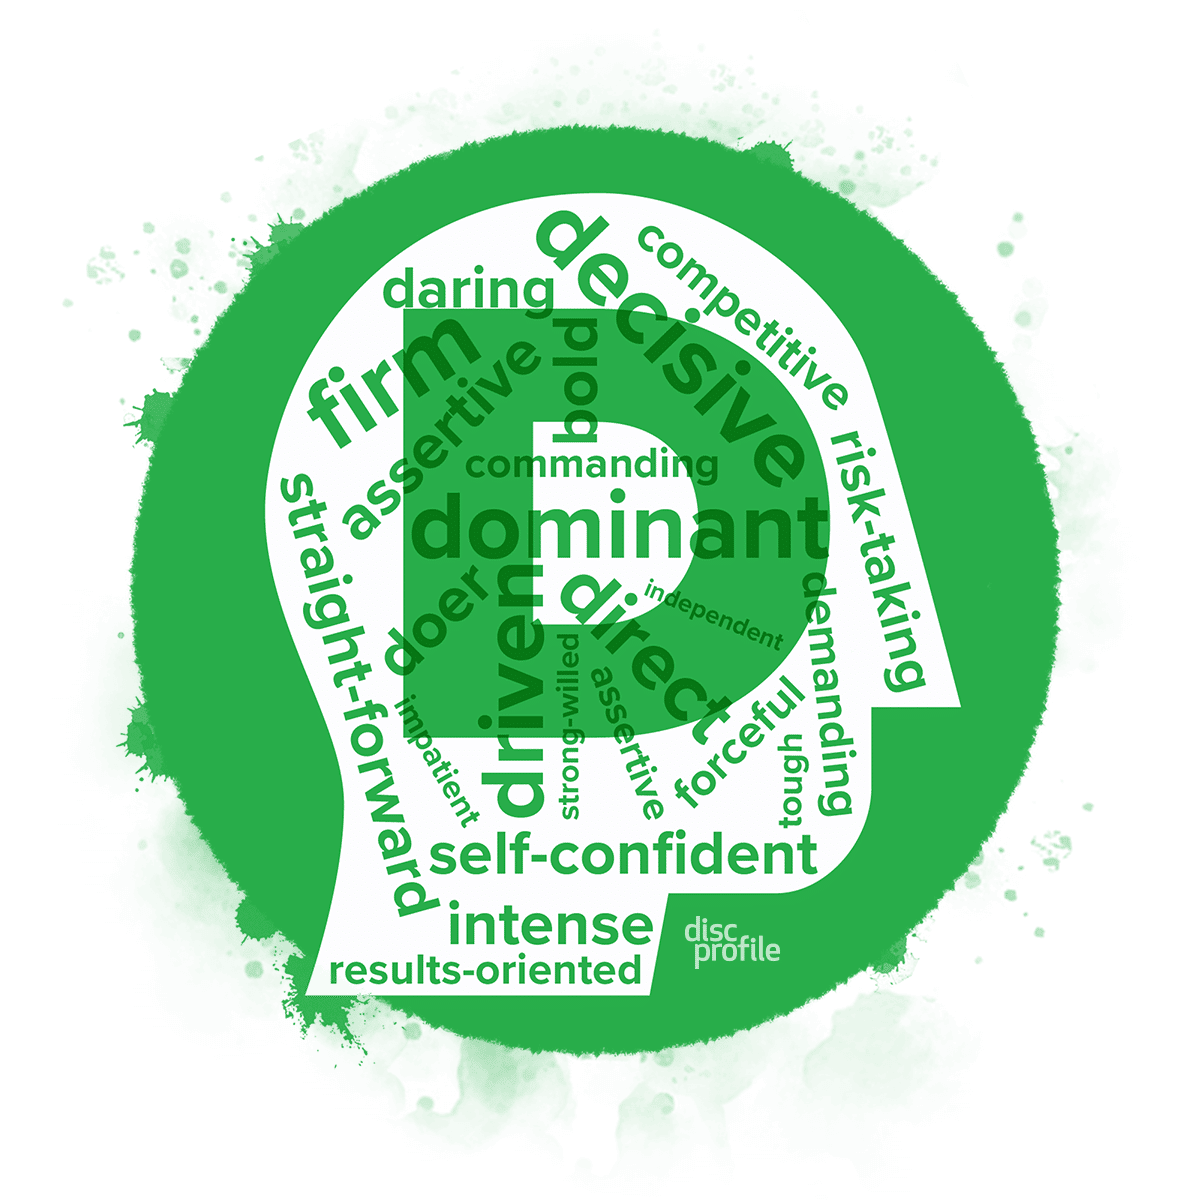 A D-style word cloud in a silhouette of a person’s head